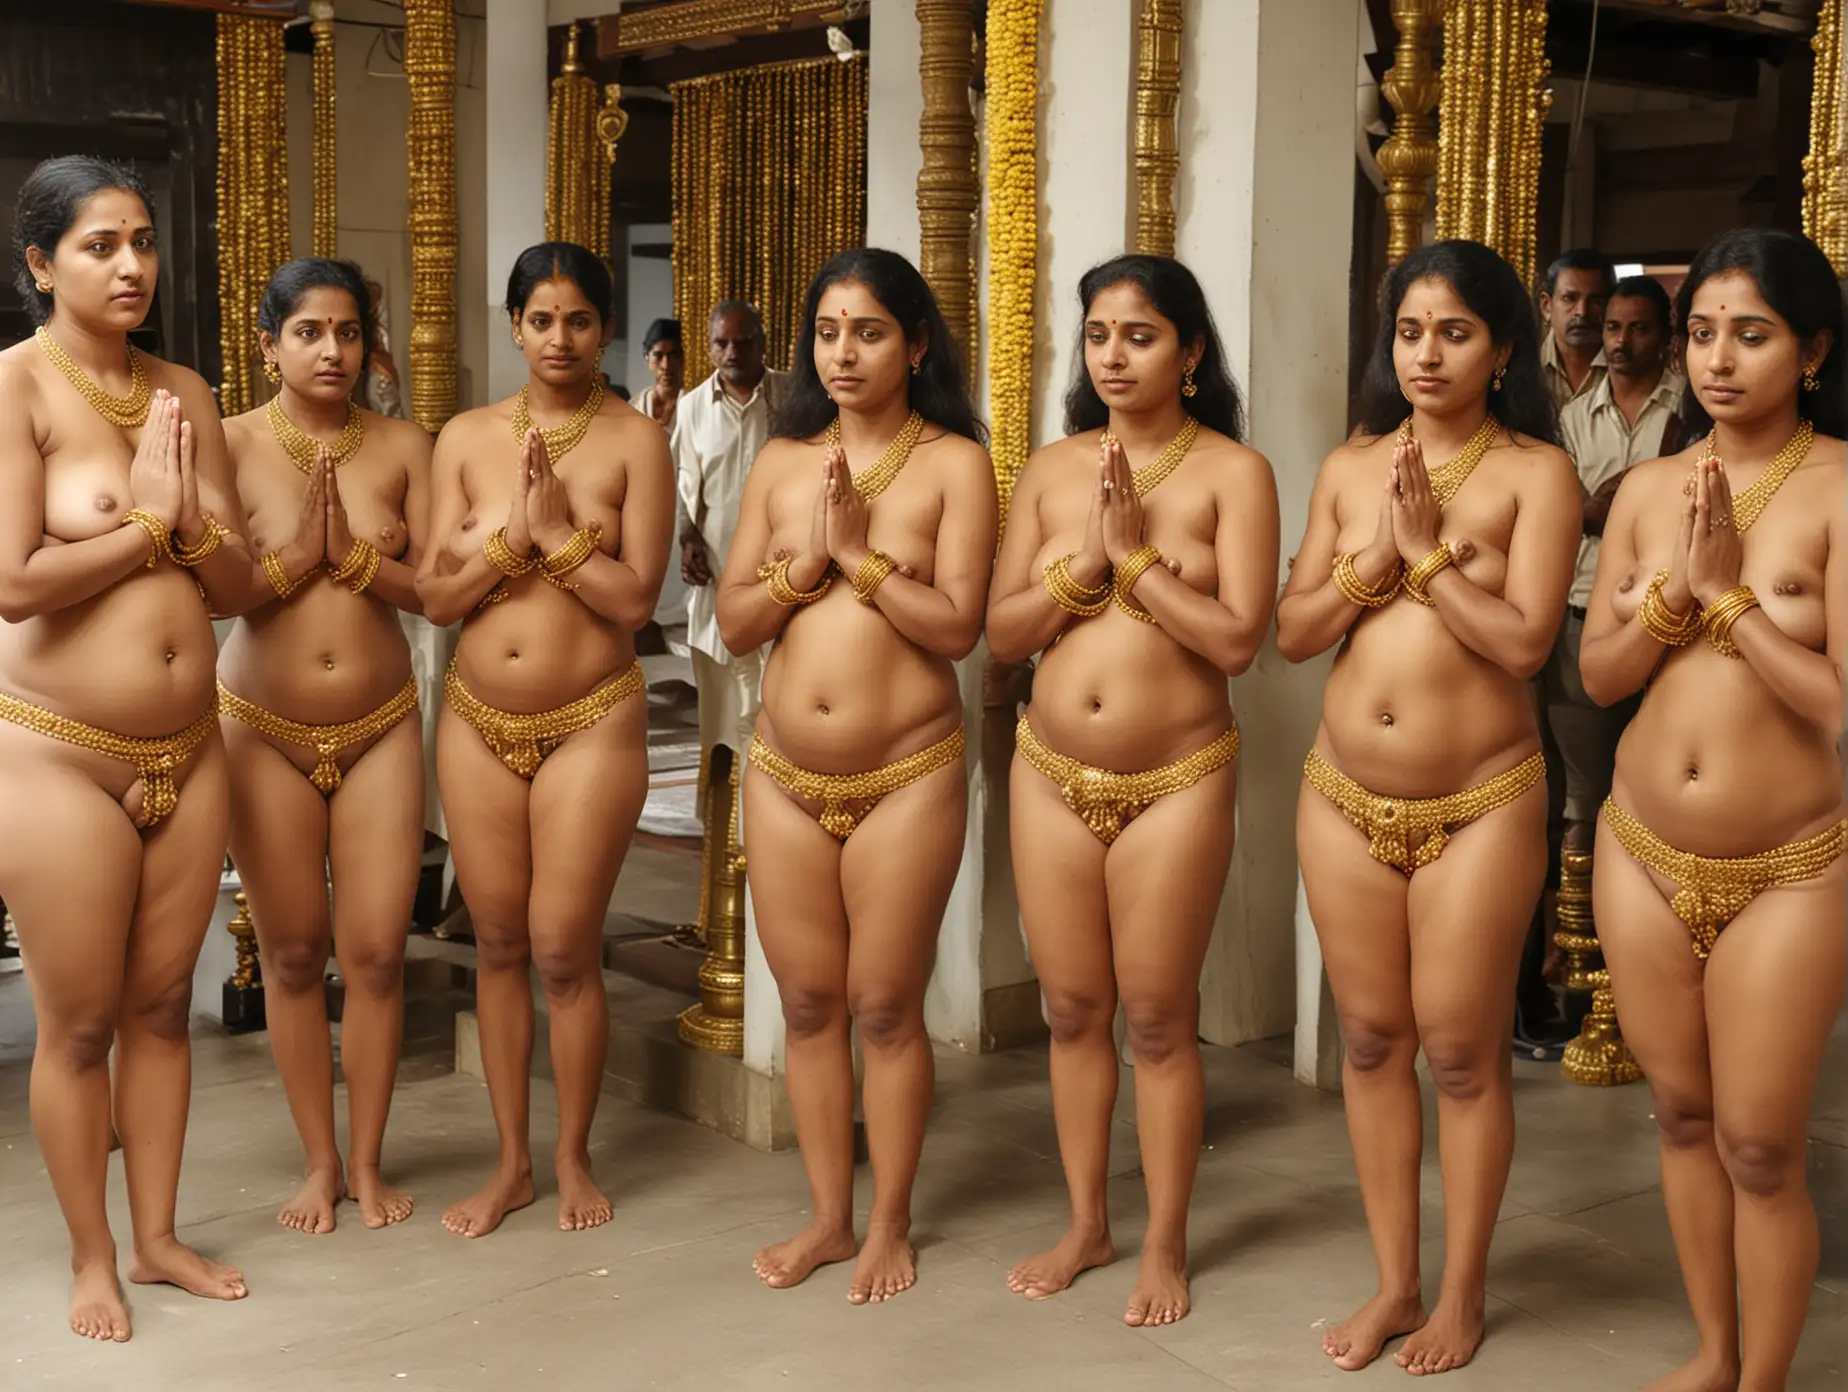 Kerala-Mature-Mothers-Praying-in-Temple-with-Naked-Daughters-and-Family